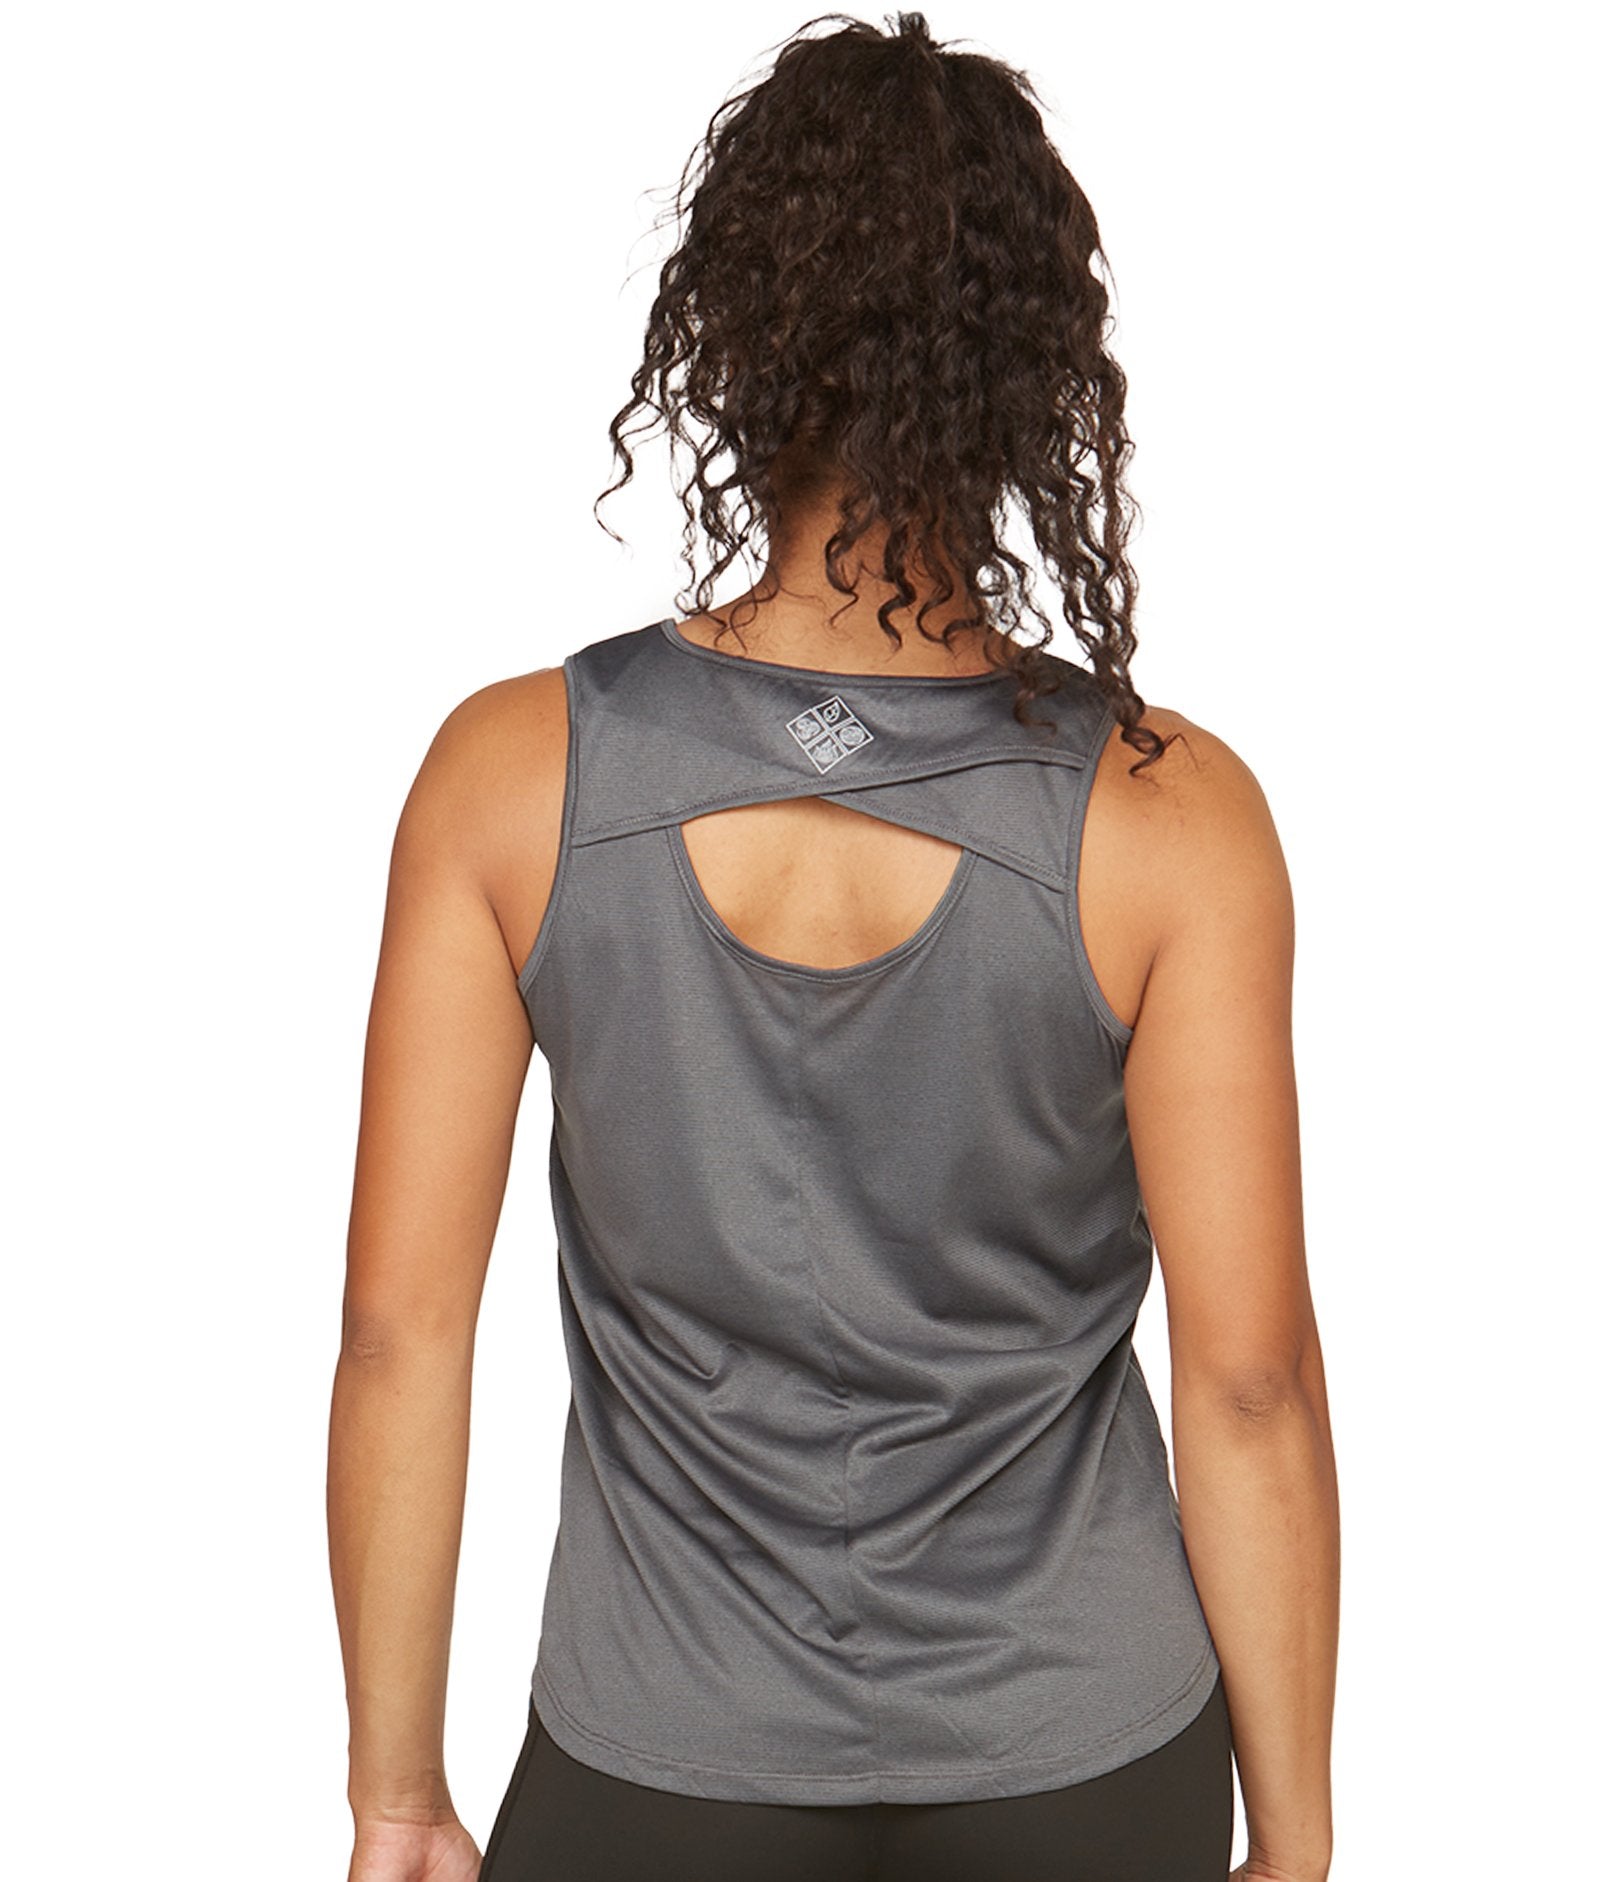 Women's Black Afloat Recycled Muscle Tank